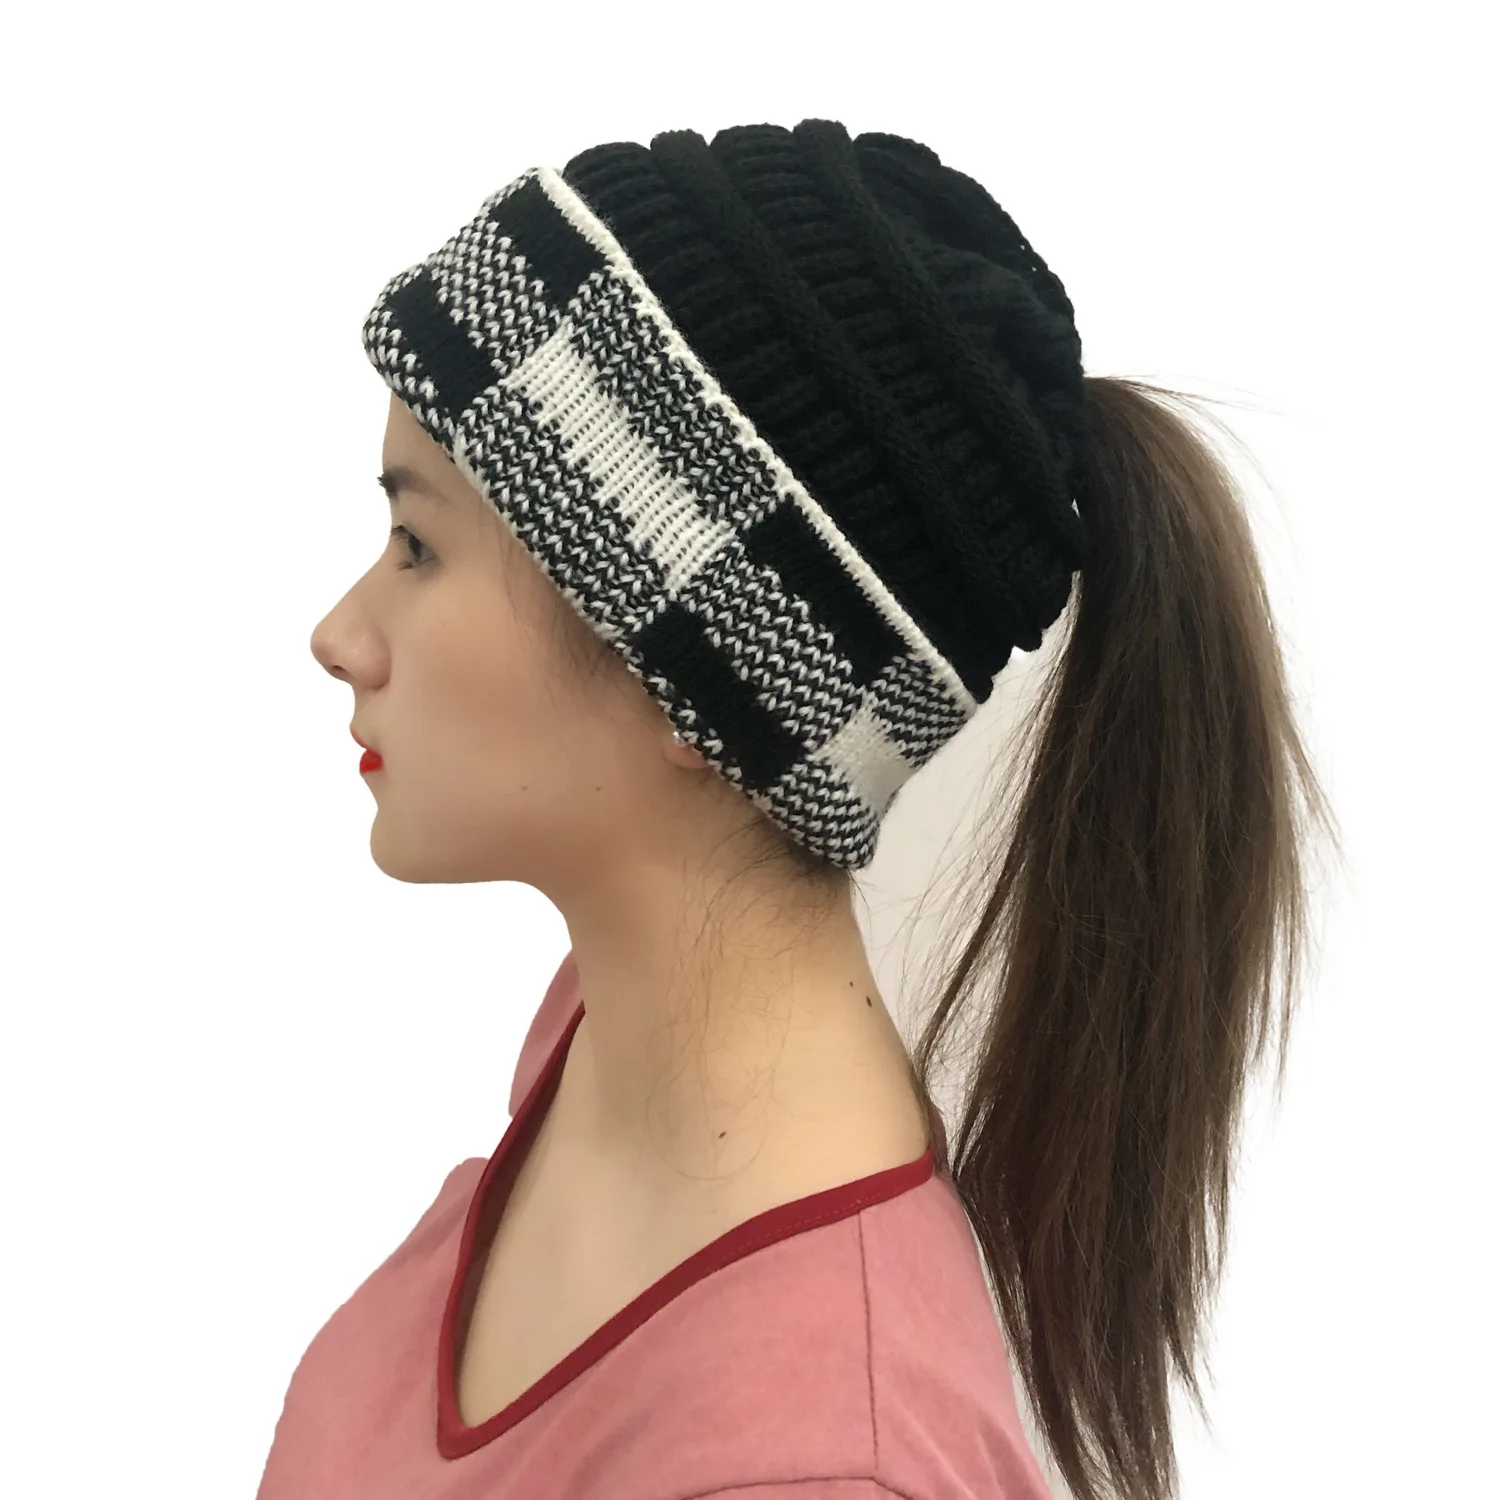 

2020 New Ponytail Beanie Women Stretch Knitted Crochet Beanies Winter Hats For Women Hats Cap Warm Lady Messy Bun Wholesale